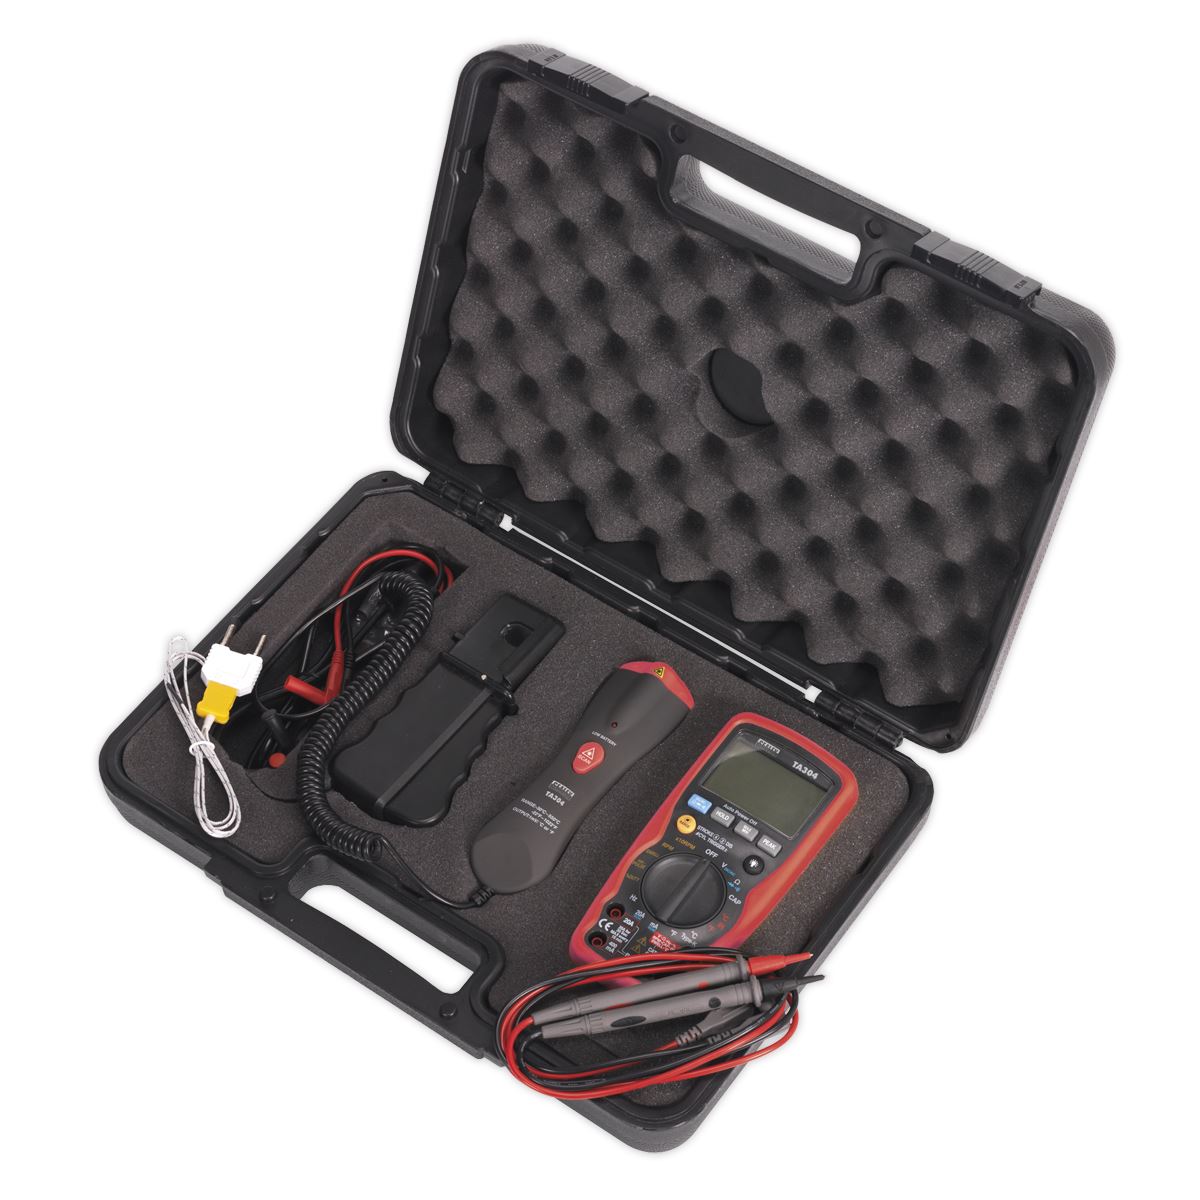 Sealey Digital Automotive Analyser 15-Function with Inductive Coupler/Infrared Temperature Probe